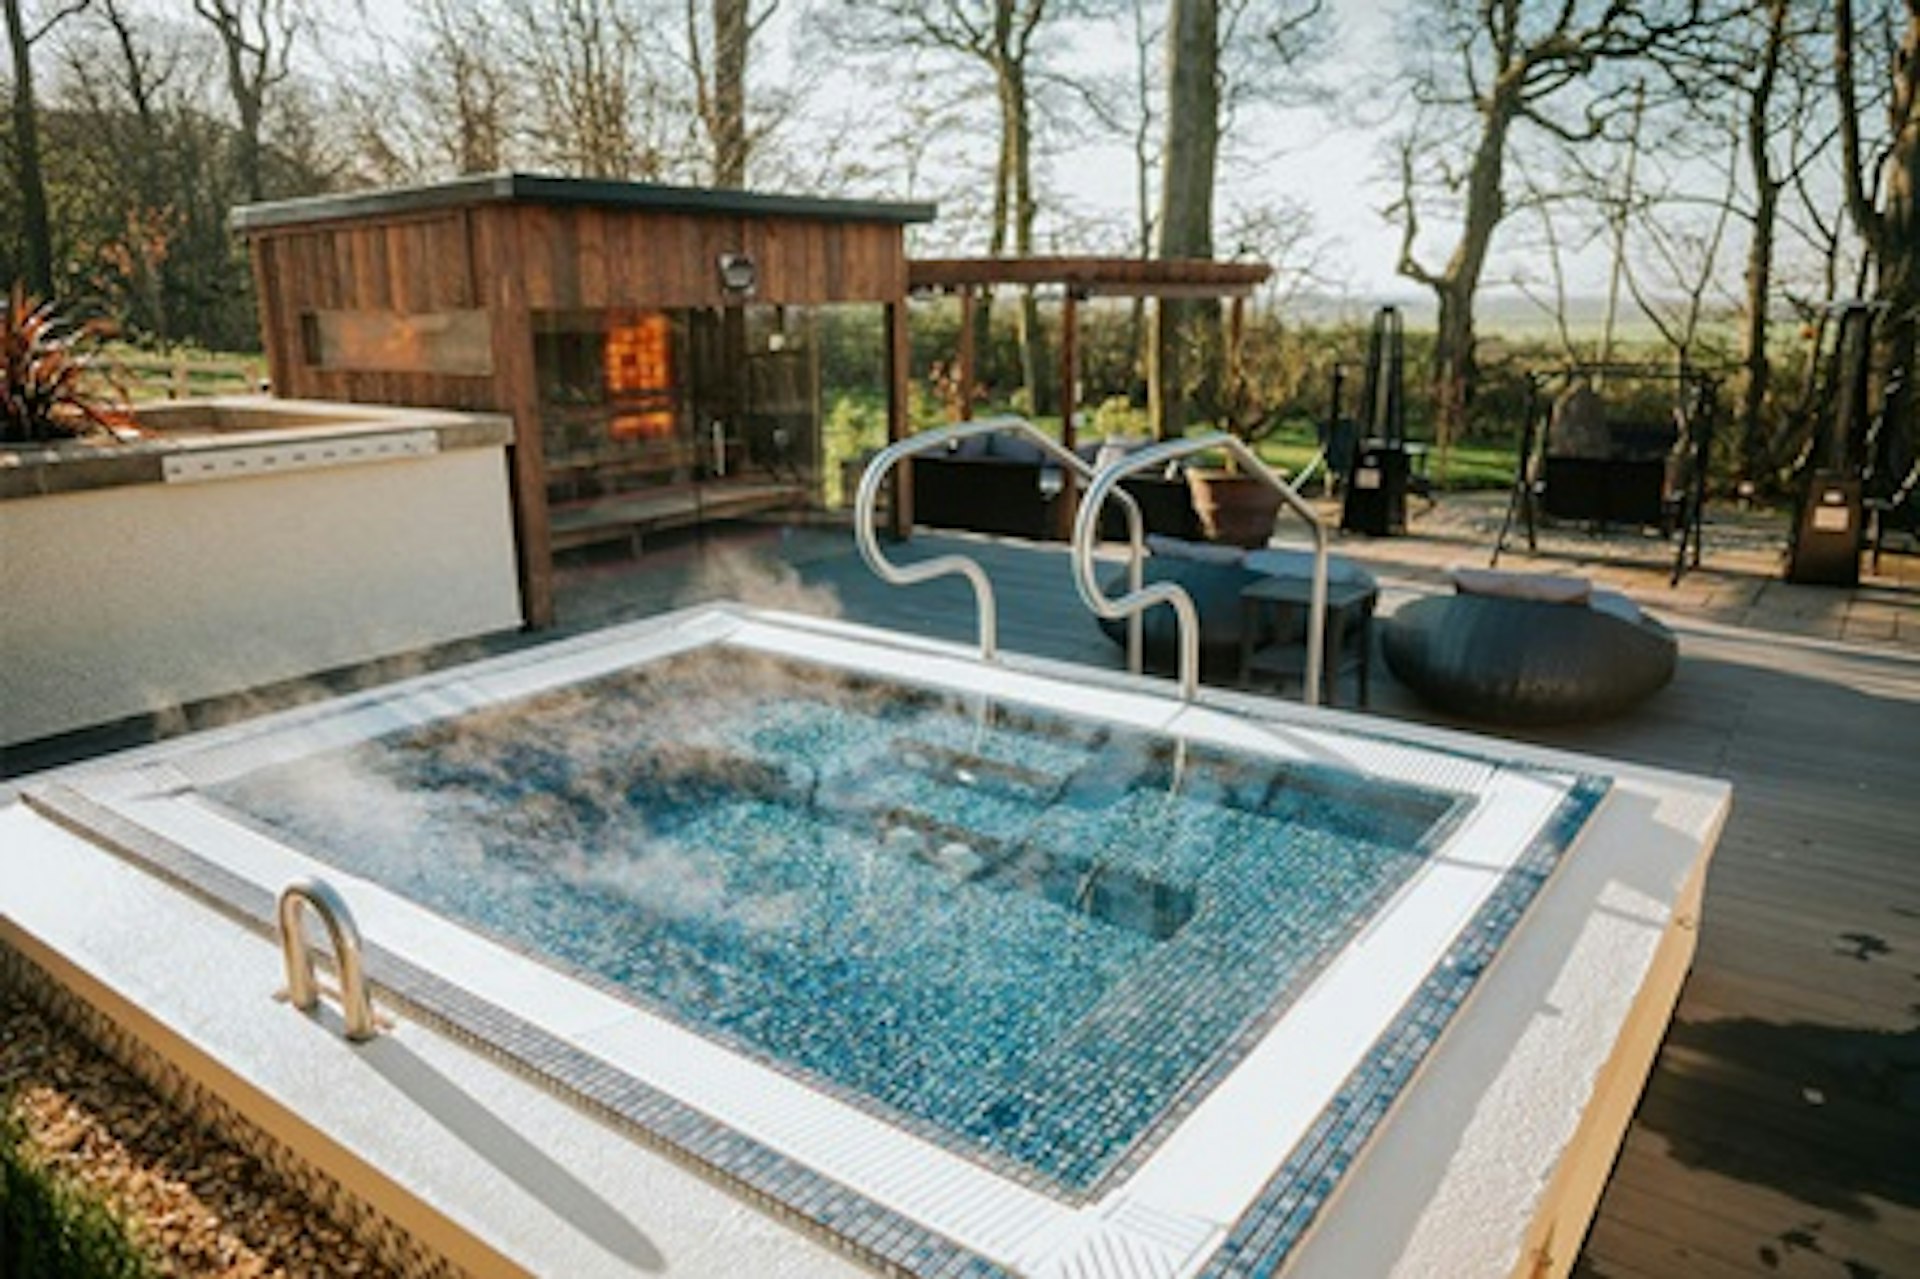 Weekend Aqua Thermal Journey with Afternoon Tea for Two at Ribby Hall Village 4